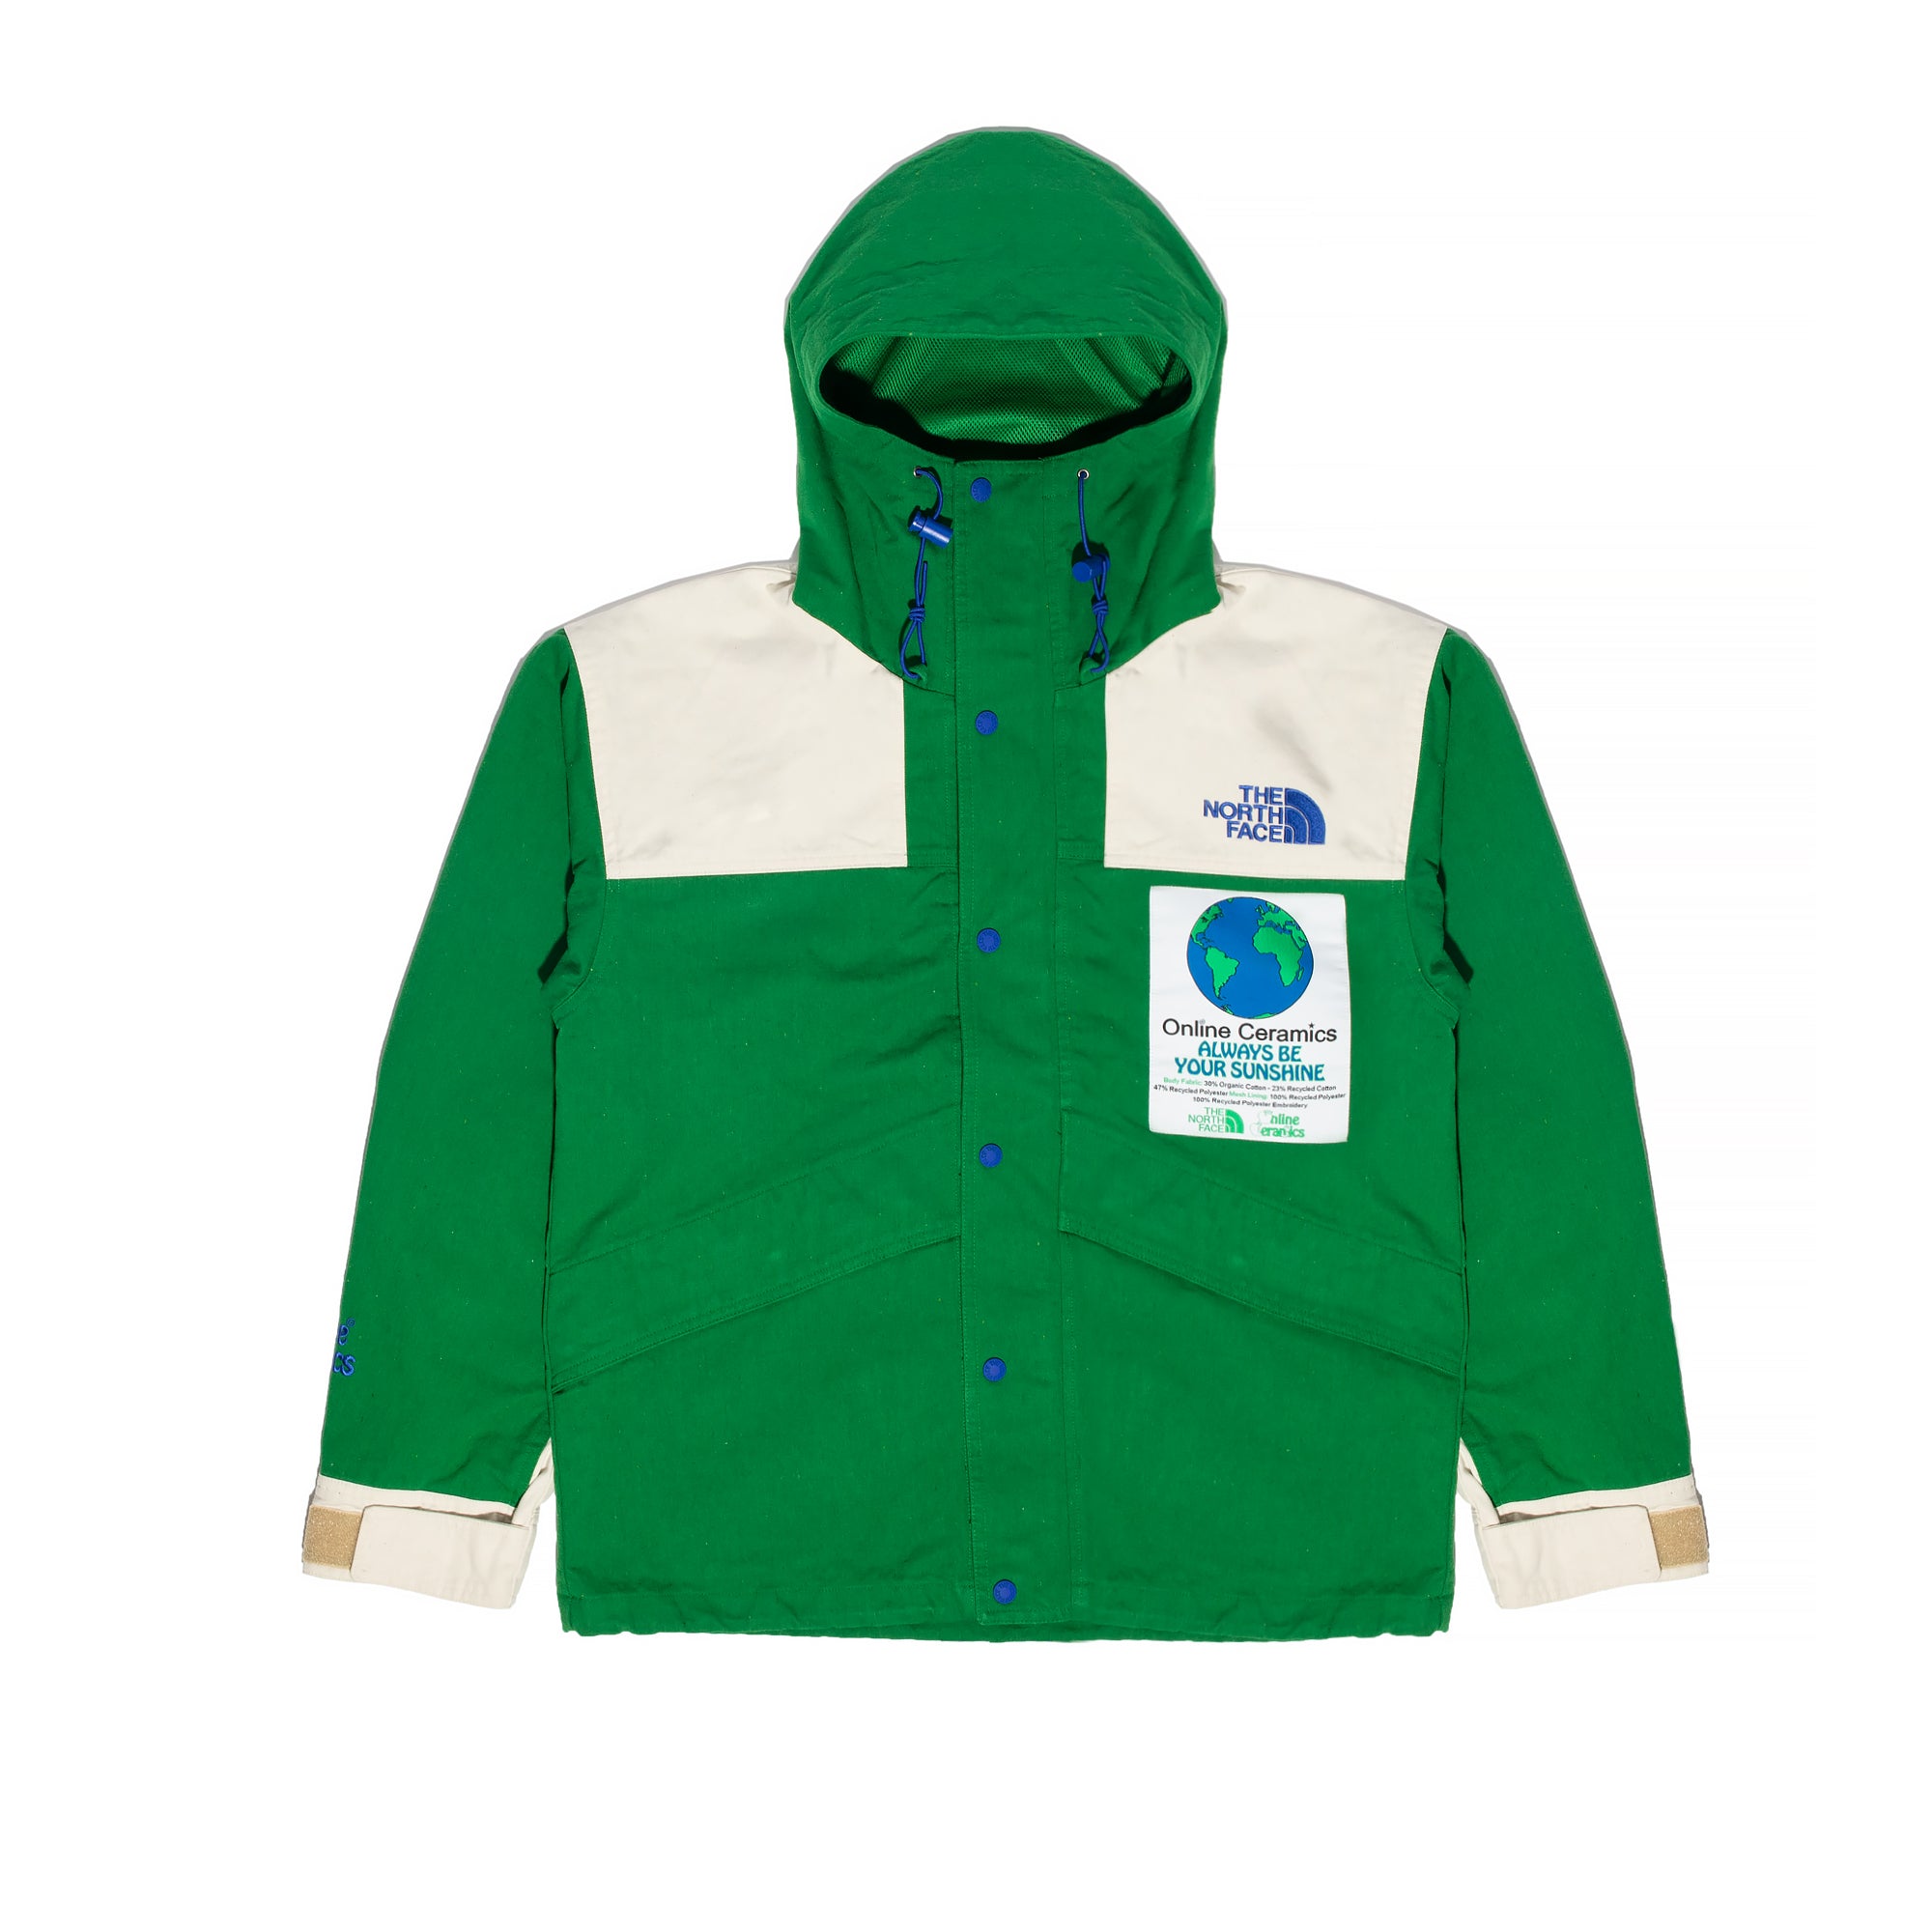 The North Face x Online Ceramics '86 Mountain Jacket